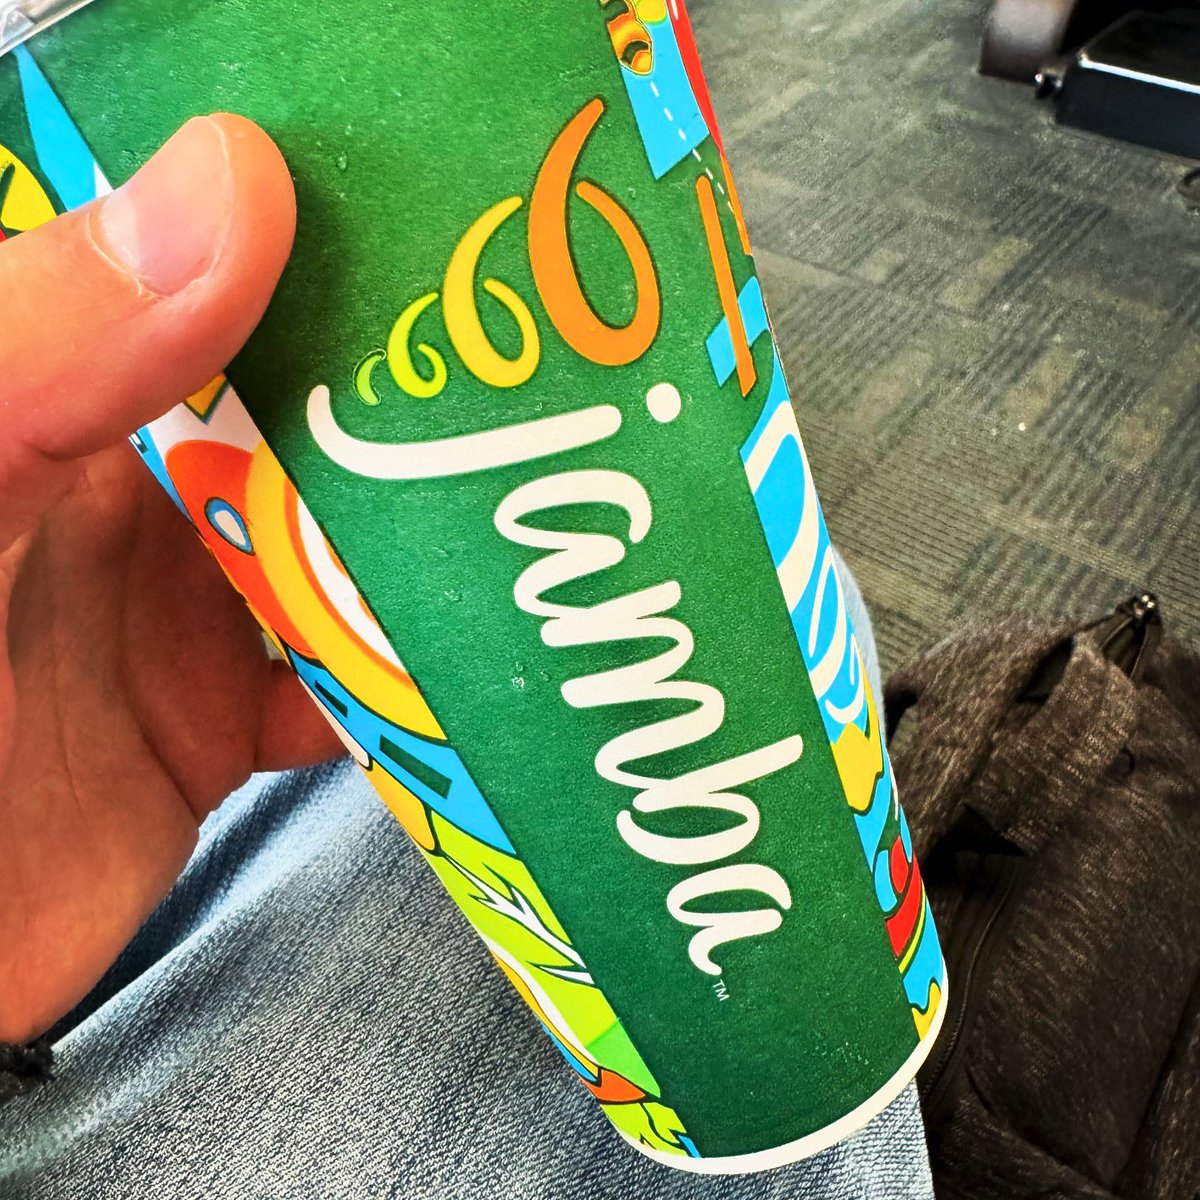 Headed to Seattle and what do I find after passing through airport security? My old L.A. favorite @JambaJuice — so this trip is off to a great start! 🧋😍

#JambaJuice #SmoothiesForDinner #Travel #ClevelandHopkins #AirportLife #JRBookwalter #PeachPerfection